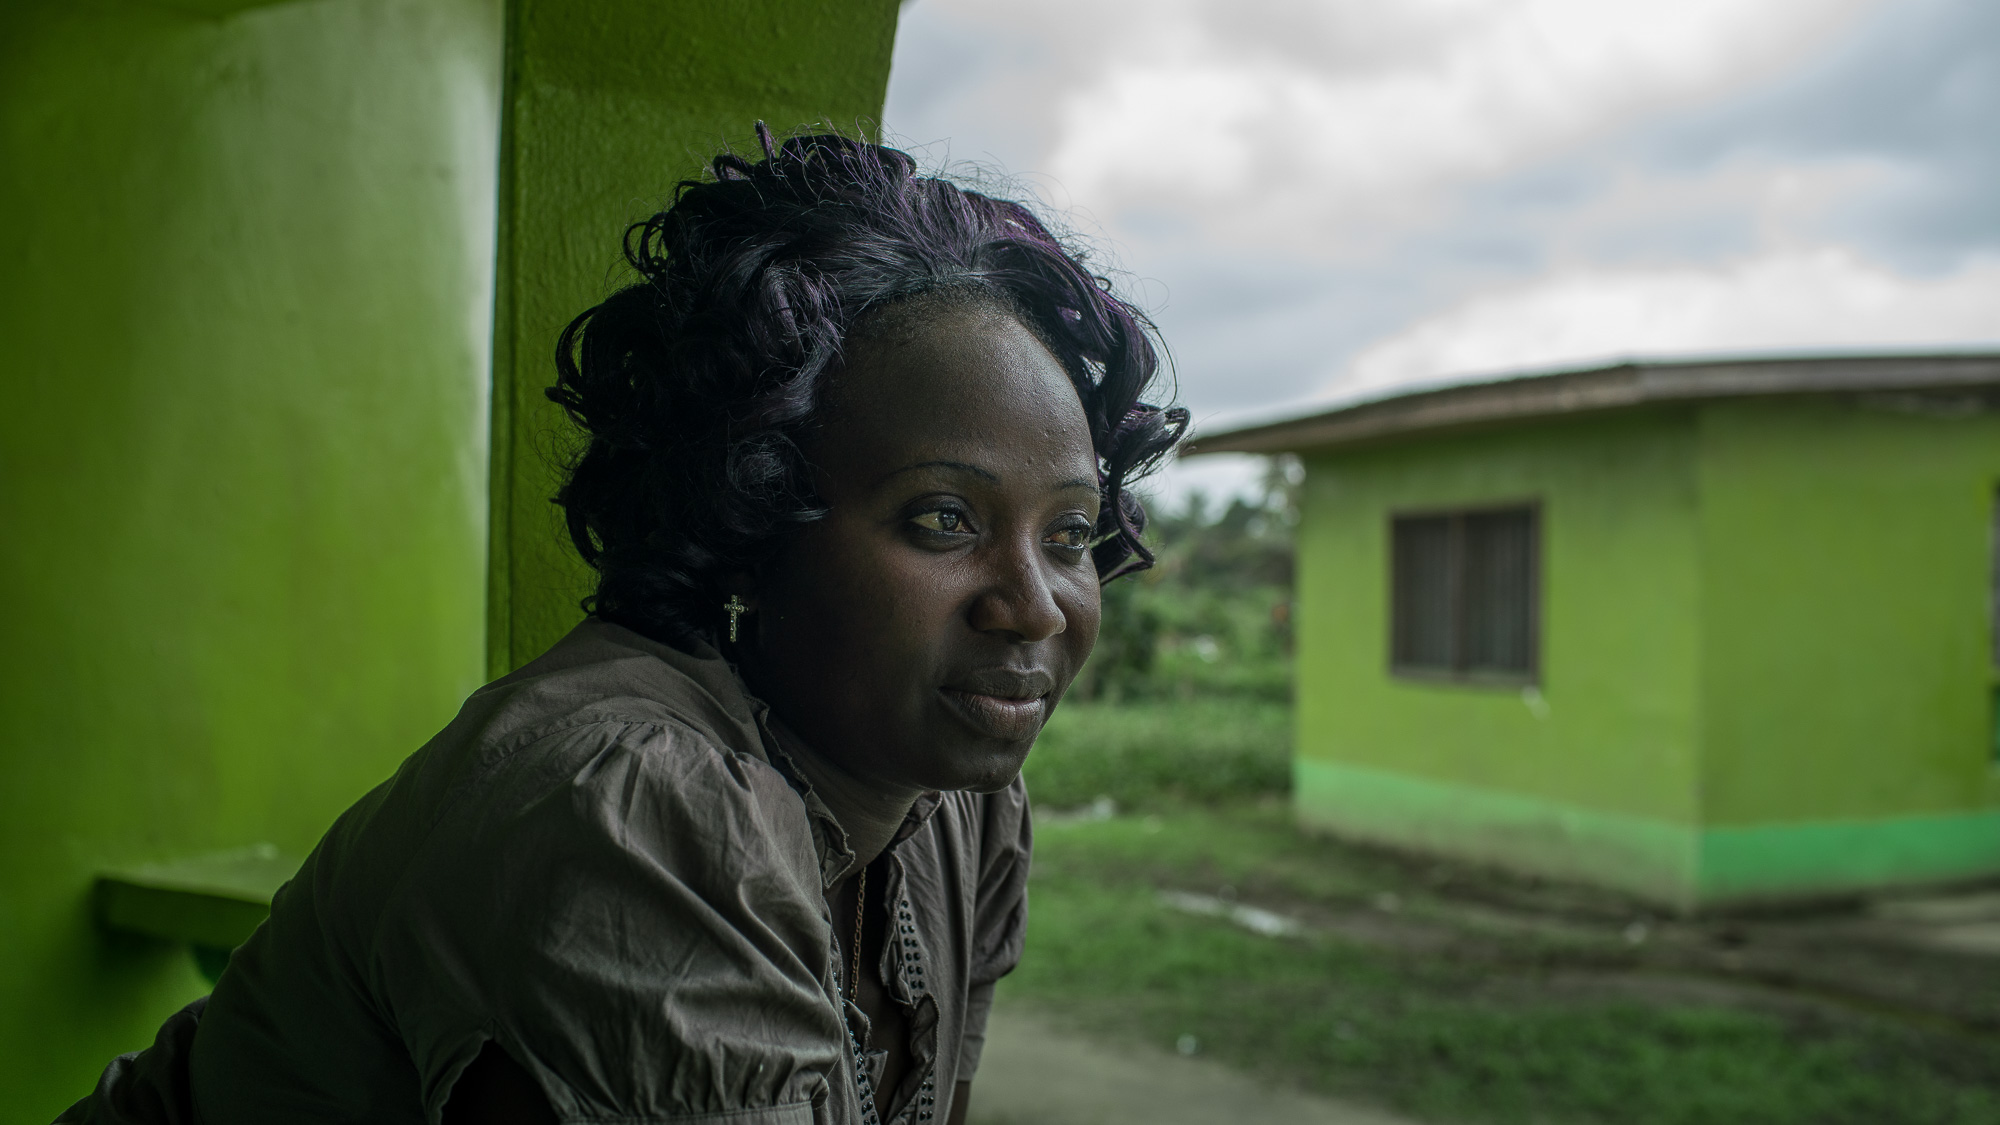 Wislyne S. Yarh Sieh at her home in Monrovia, Liberia